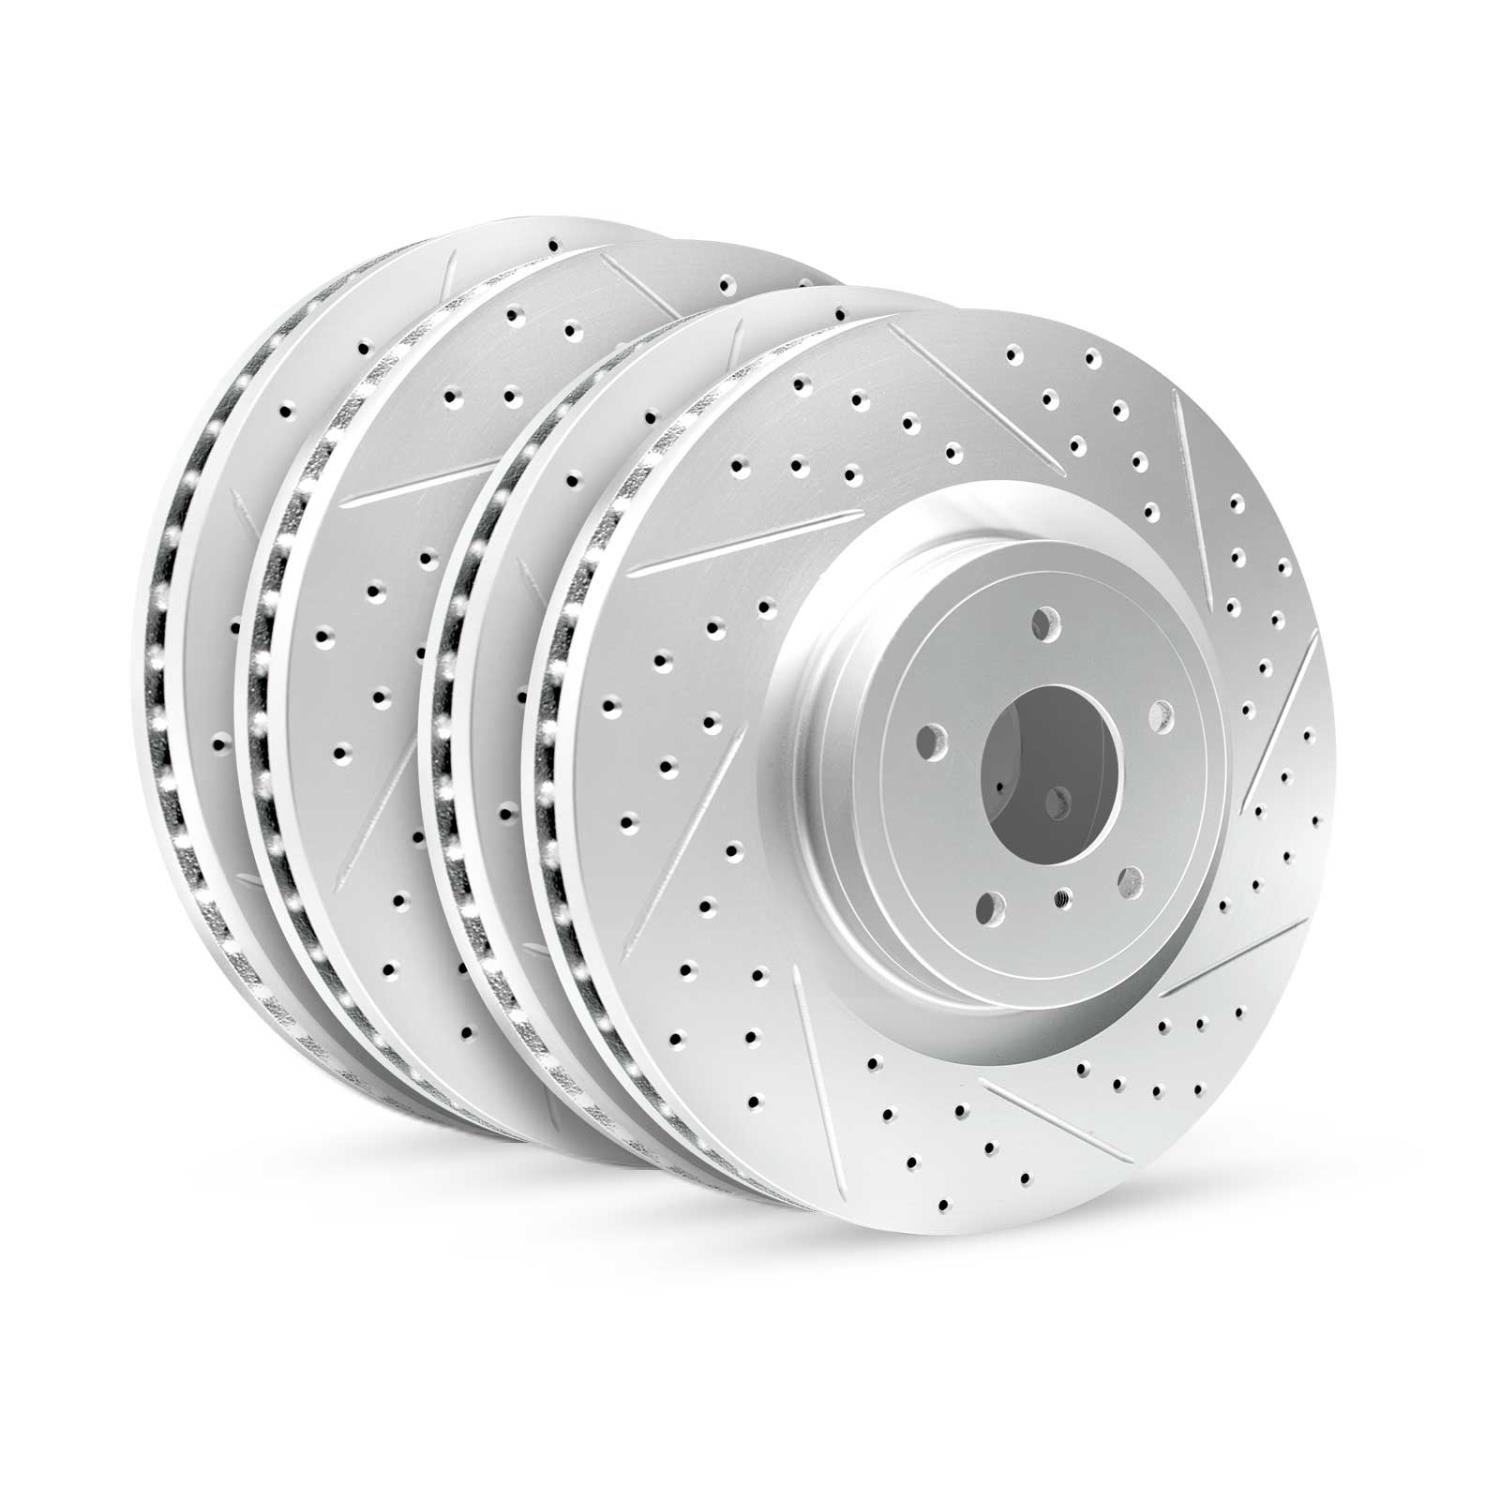 GEO-Carbon Drilled/Slotted Rotors, 2012-2020 BMW, Position: Front/Rear